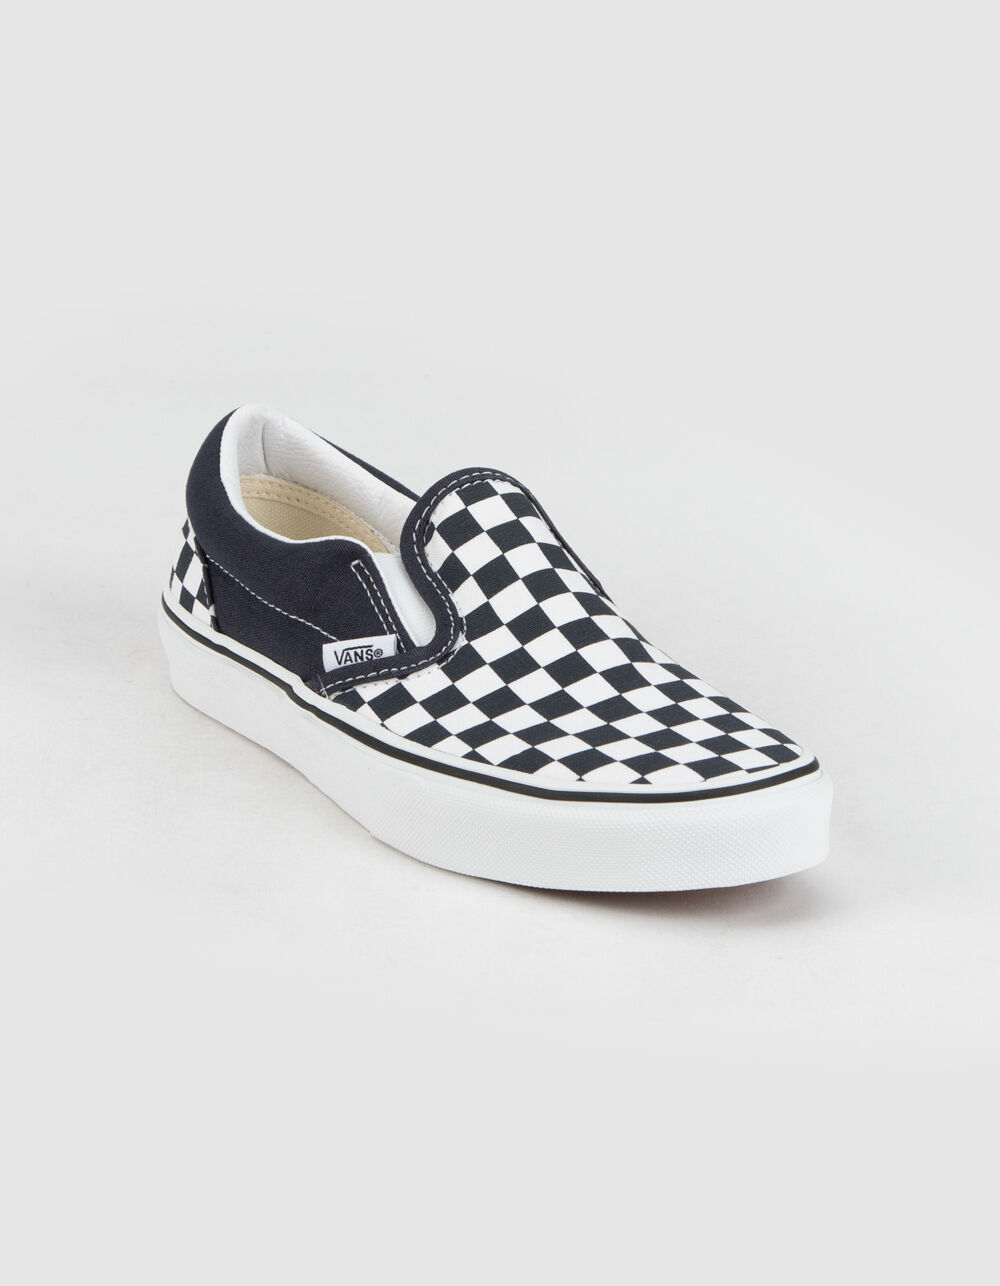 VANS Classic Checkerboard Slip-On Girls Shoes - INK/TRUE WHITE | Tillys